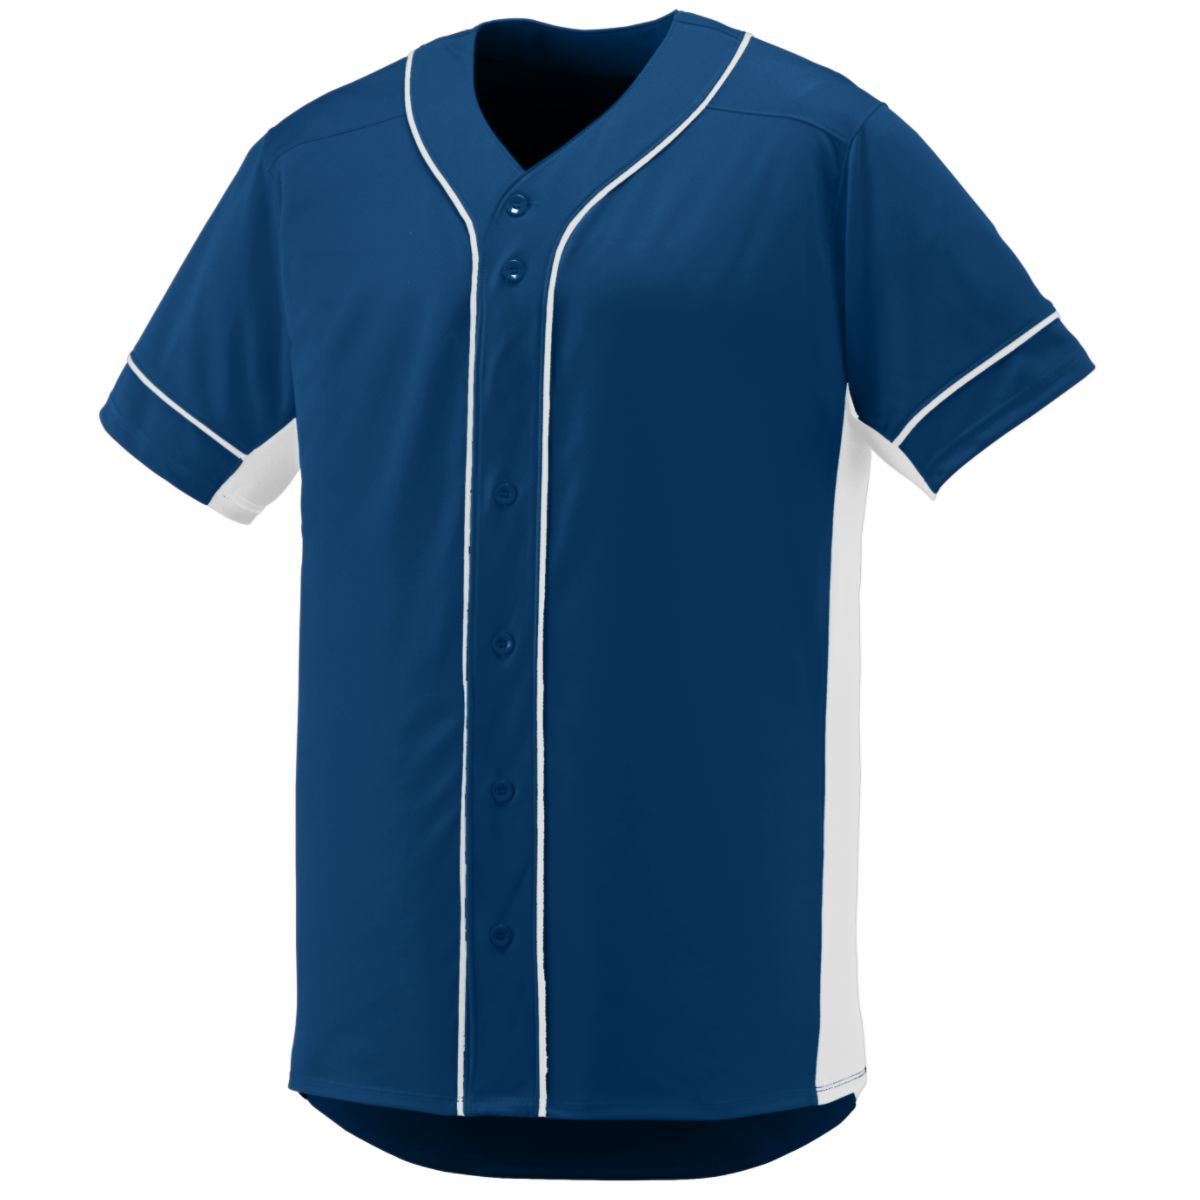 Augusta Sportswear Slugger Jersey in Navy/White  -Part of the Adult, Adult-Jersey, Augusta-Products, Baseball, Shirts, All-Sports, All-Sports-1 product lines at KanaleyCreations.com